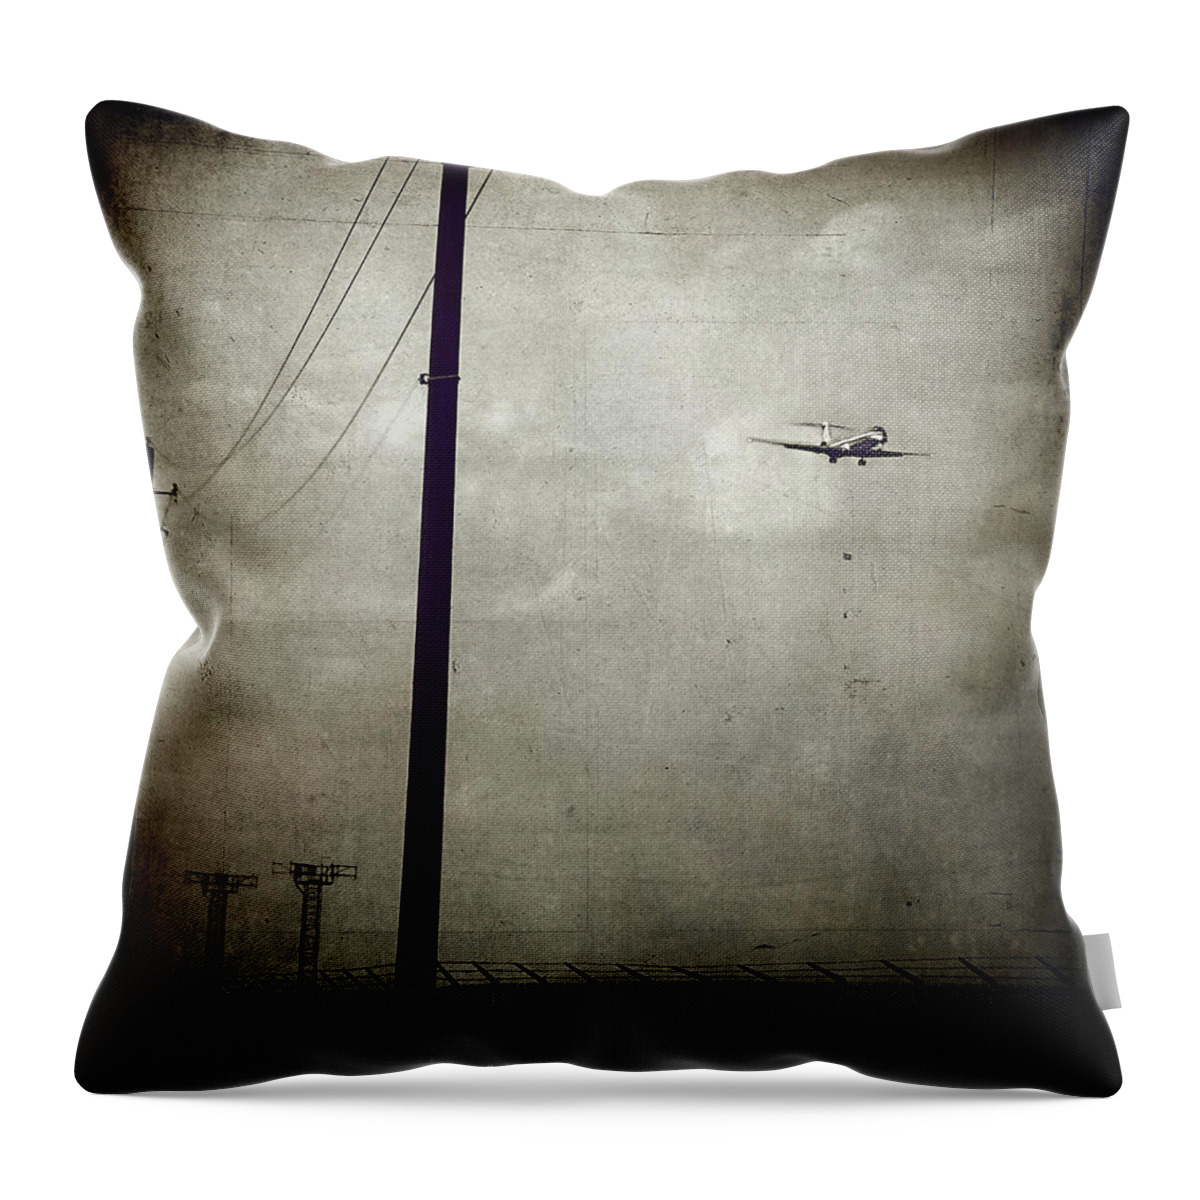 Texture Throw Pillow featuring the photograph Sad Goodbyes by Trish Mistric